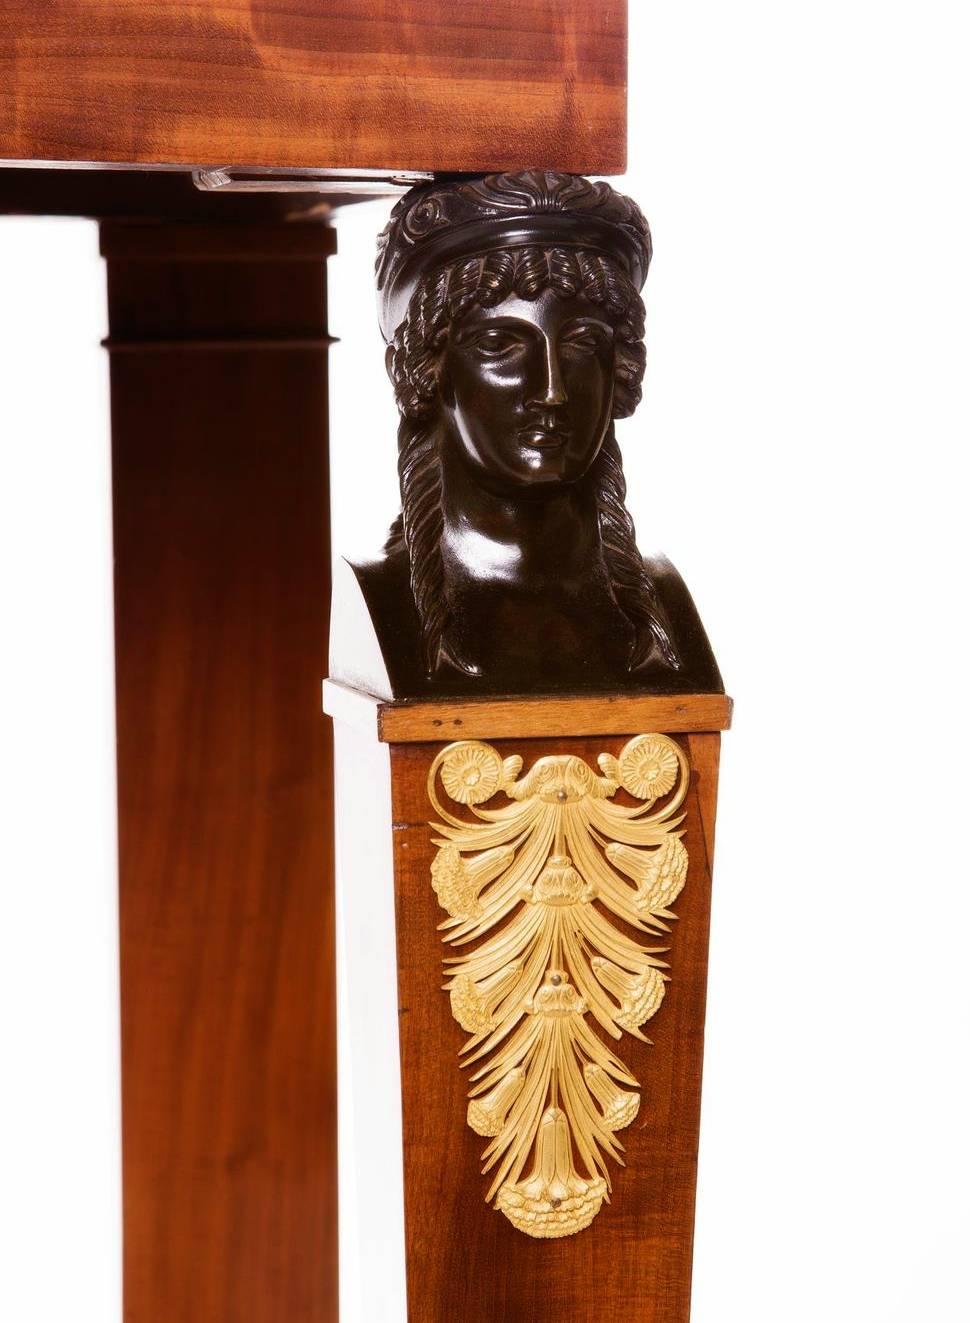 A fine and rare Empire mahogany console with gilt bronze mounts and a Belgium black marble top. Signed Chapuis, pieces of furniture signed by Jean-Joseph Chapuis, are rarely found in public collections outside of France. He was a French ebeniste or